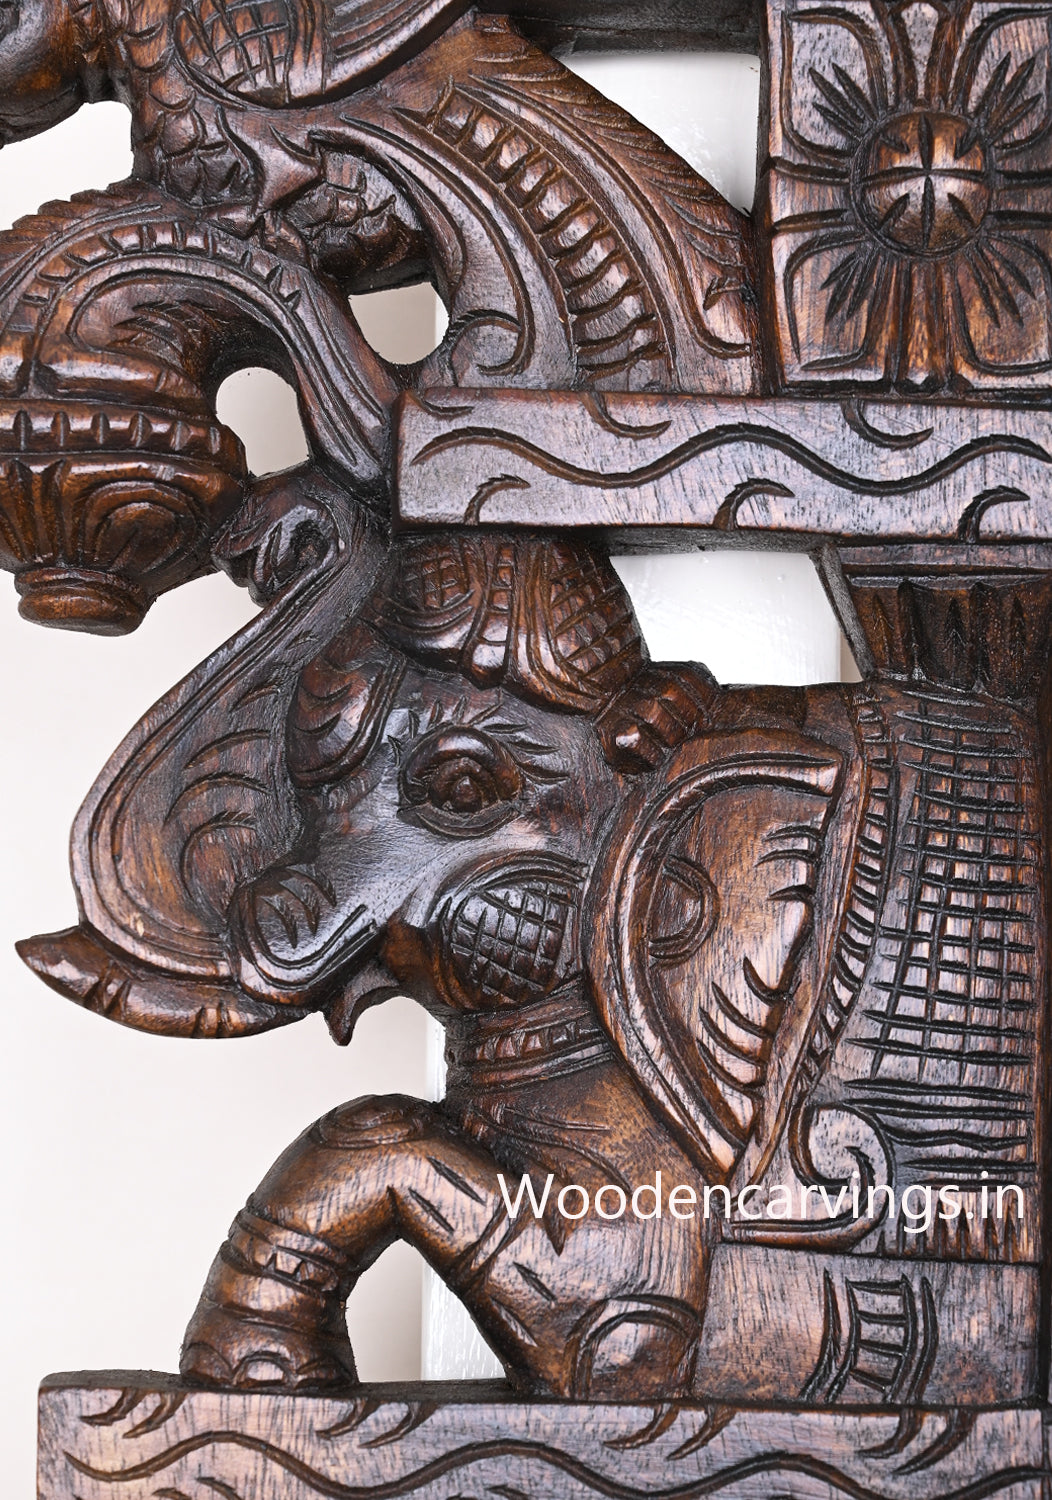 Detaily Carved Upraised Elephants with Parrots Wooden Handmade Light Weight Paired Wall Brackets 15"